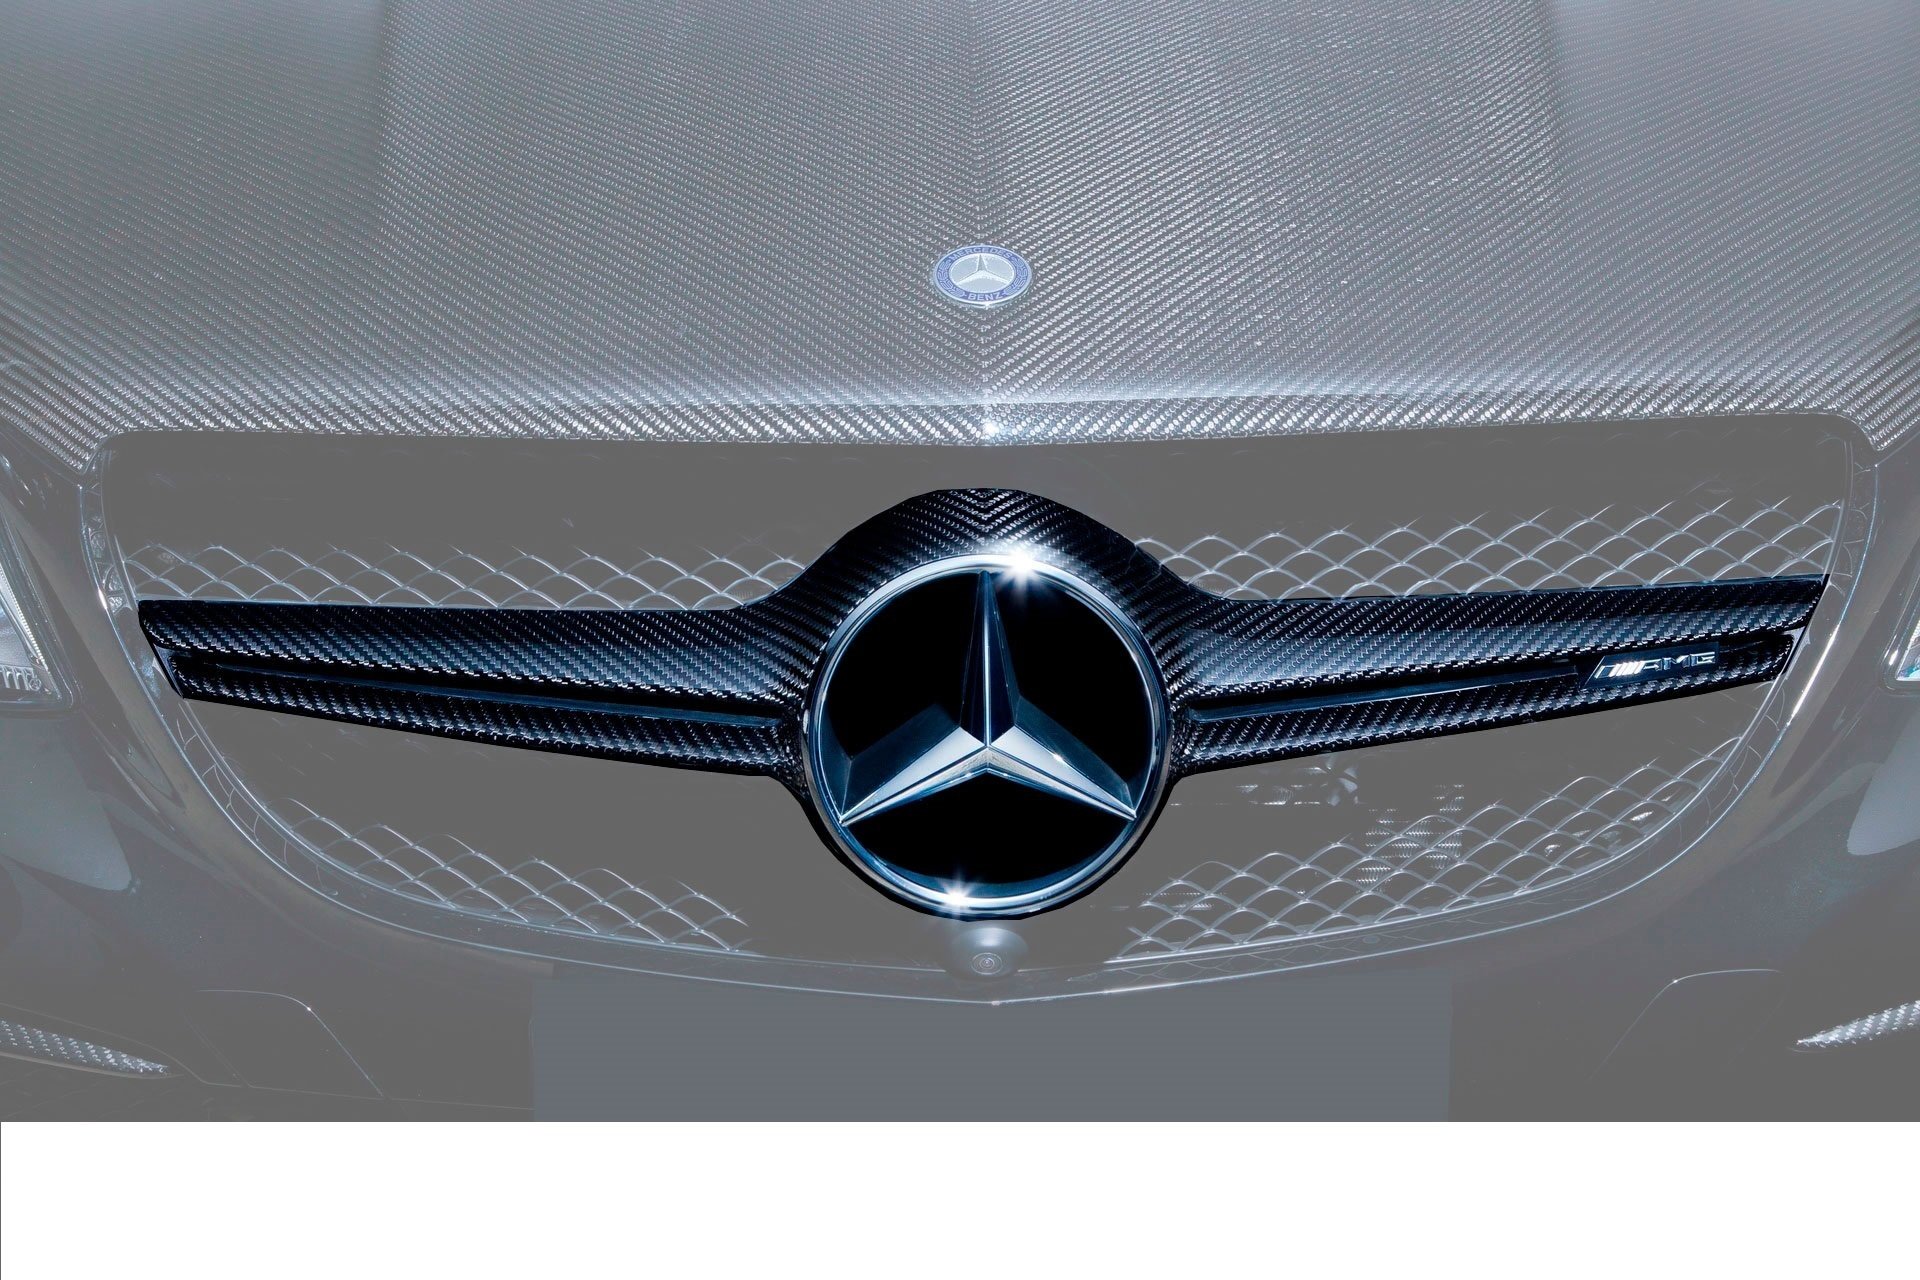 Hodoor Performance Carbon fiber grille 63 AMG Brabus Style for Mercedes GLK coupe With 292 new model